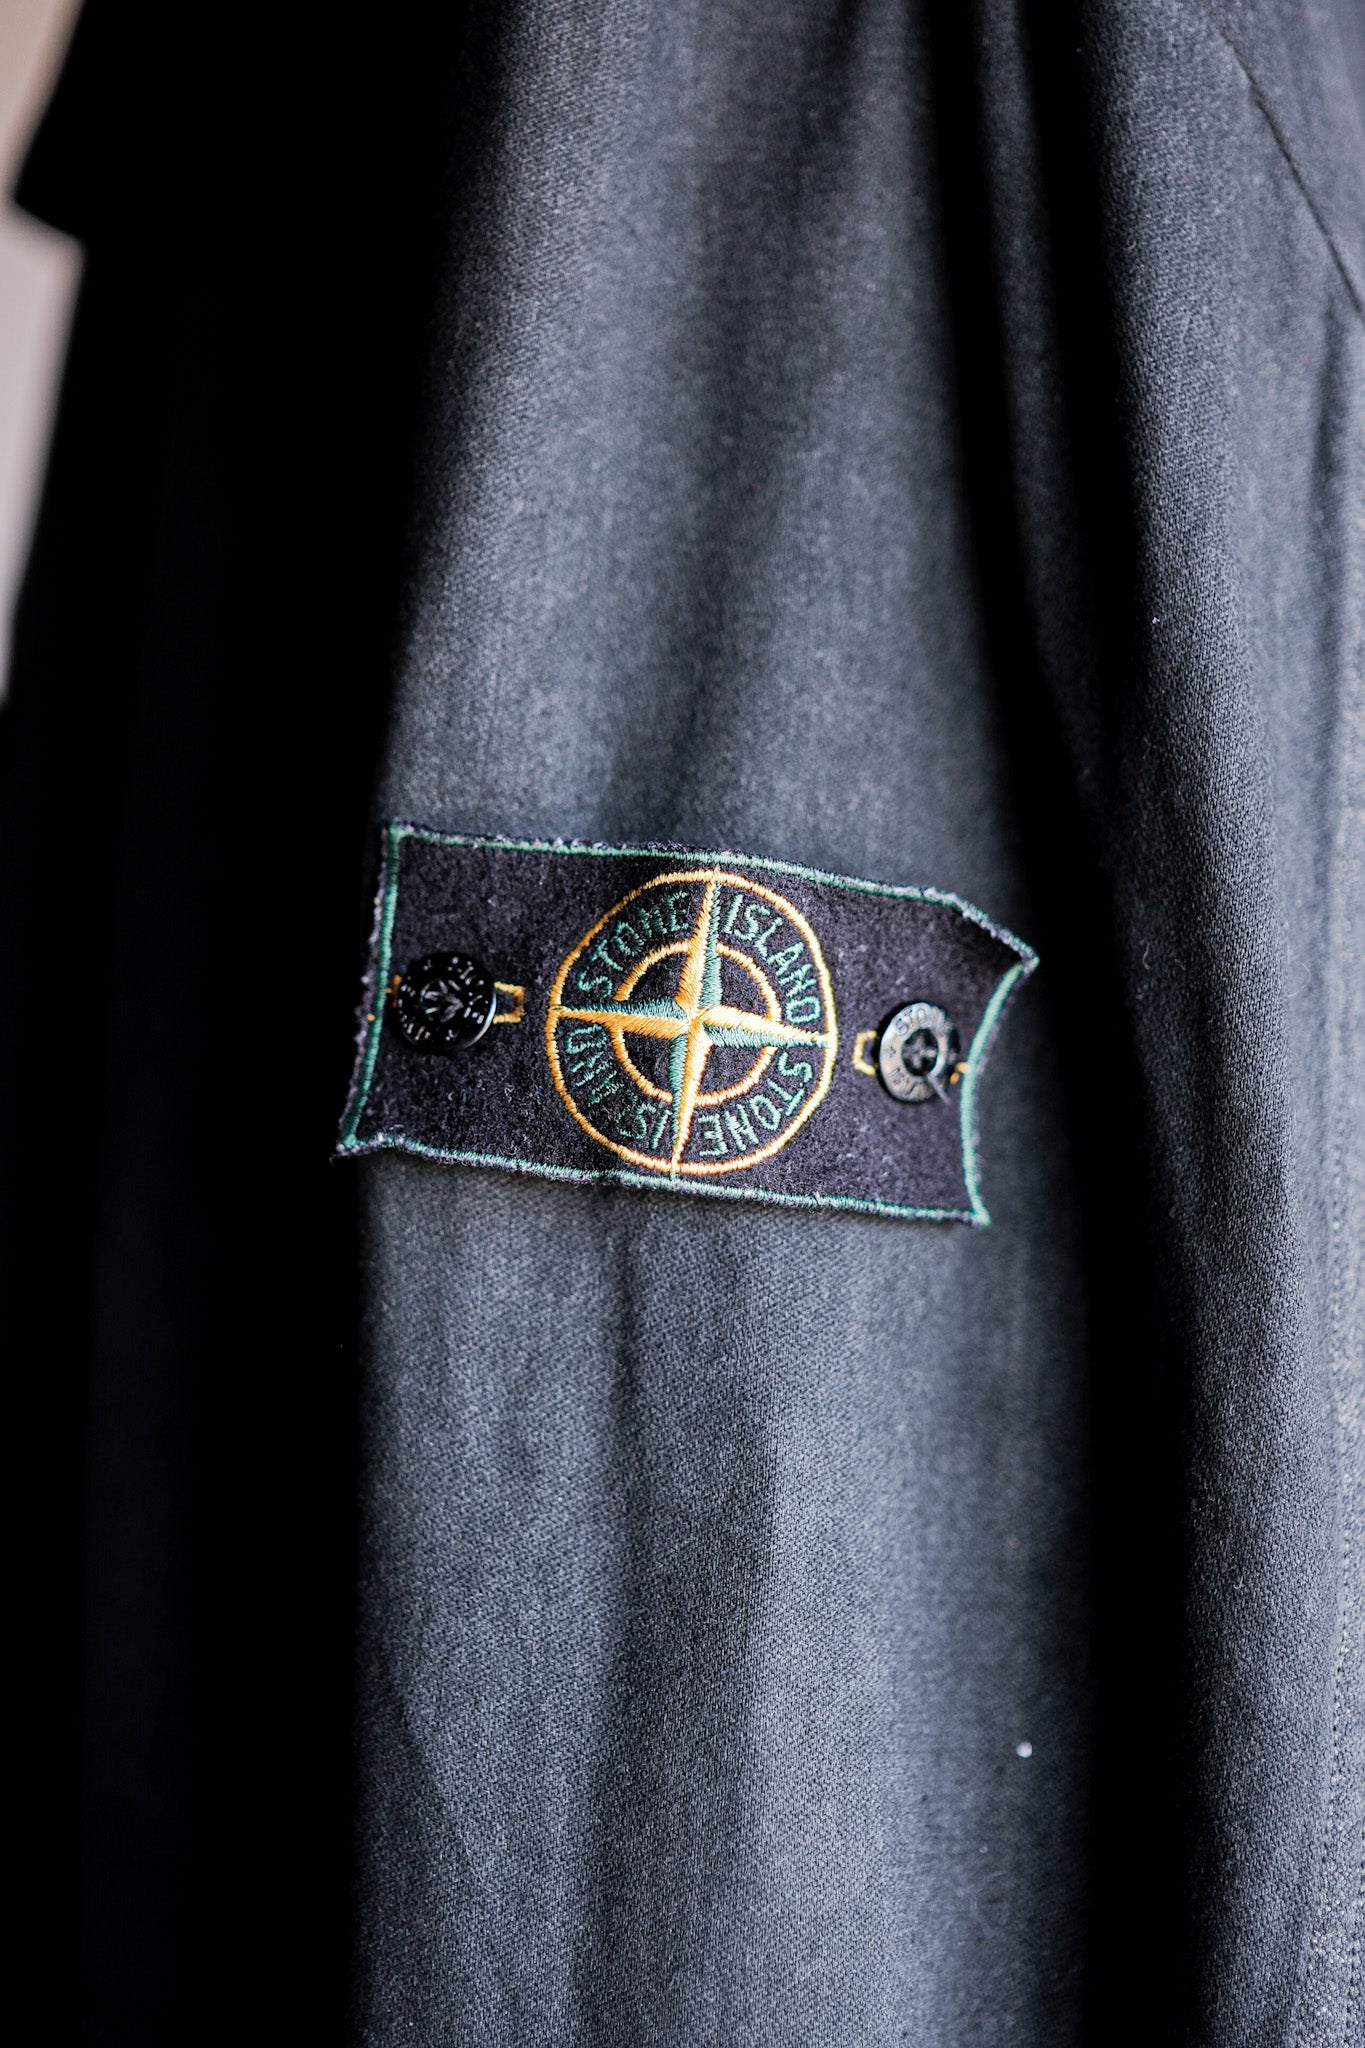 [~ 80's] Old Stone Island Double Putted Jacket Size.xxl "Marina Archive"